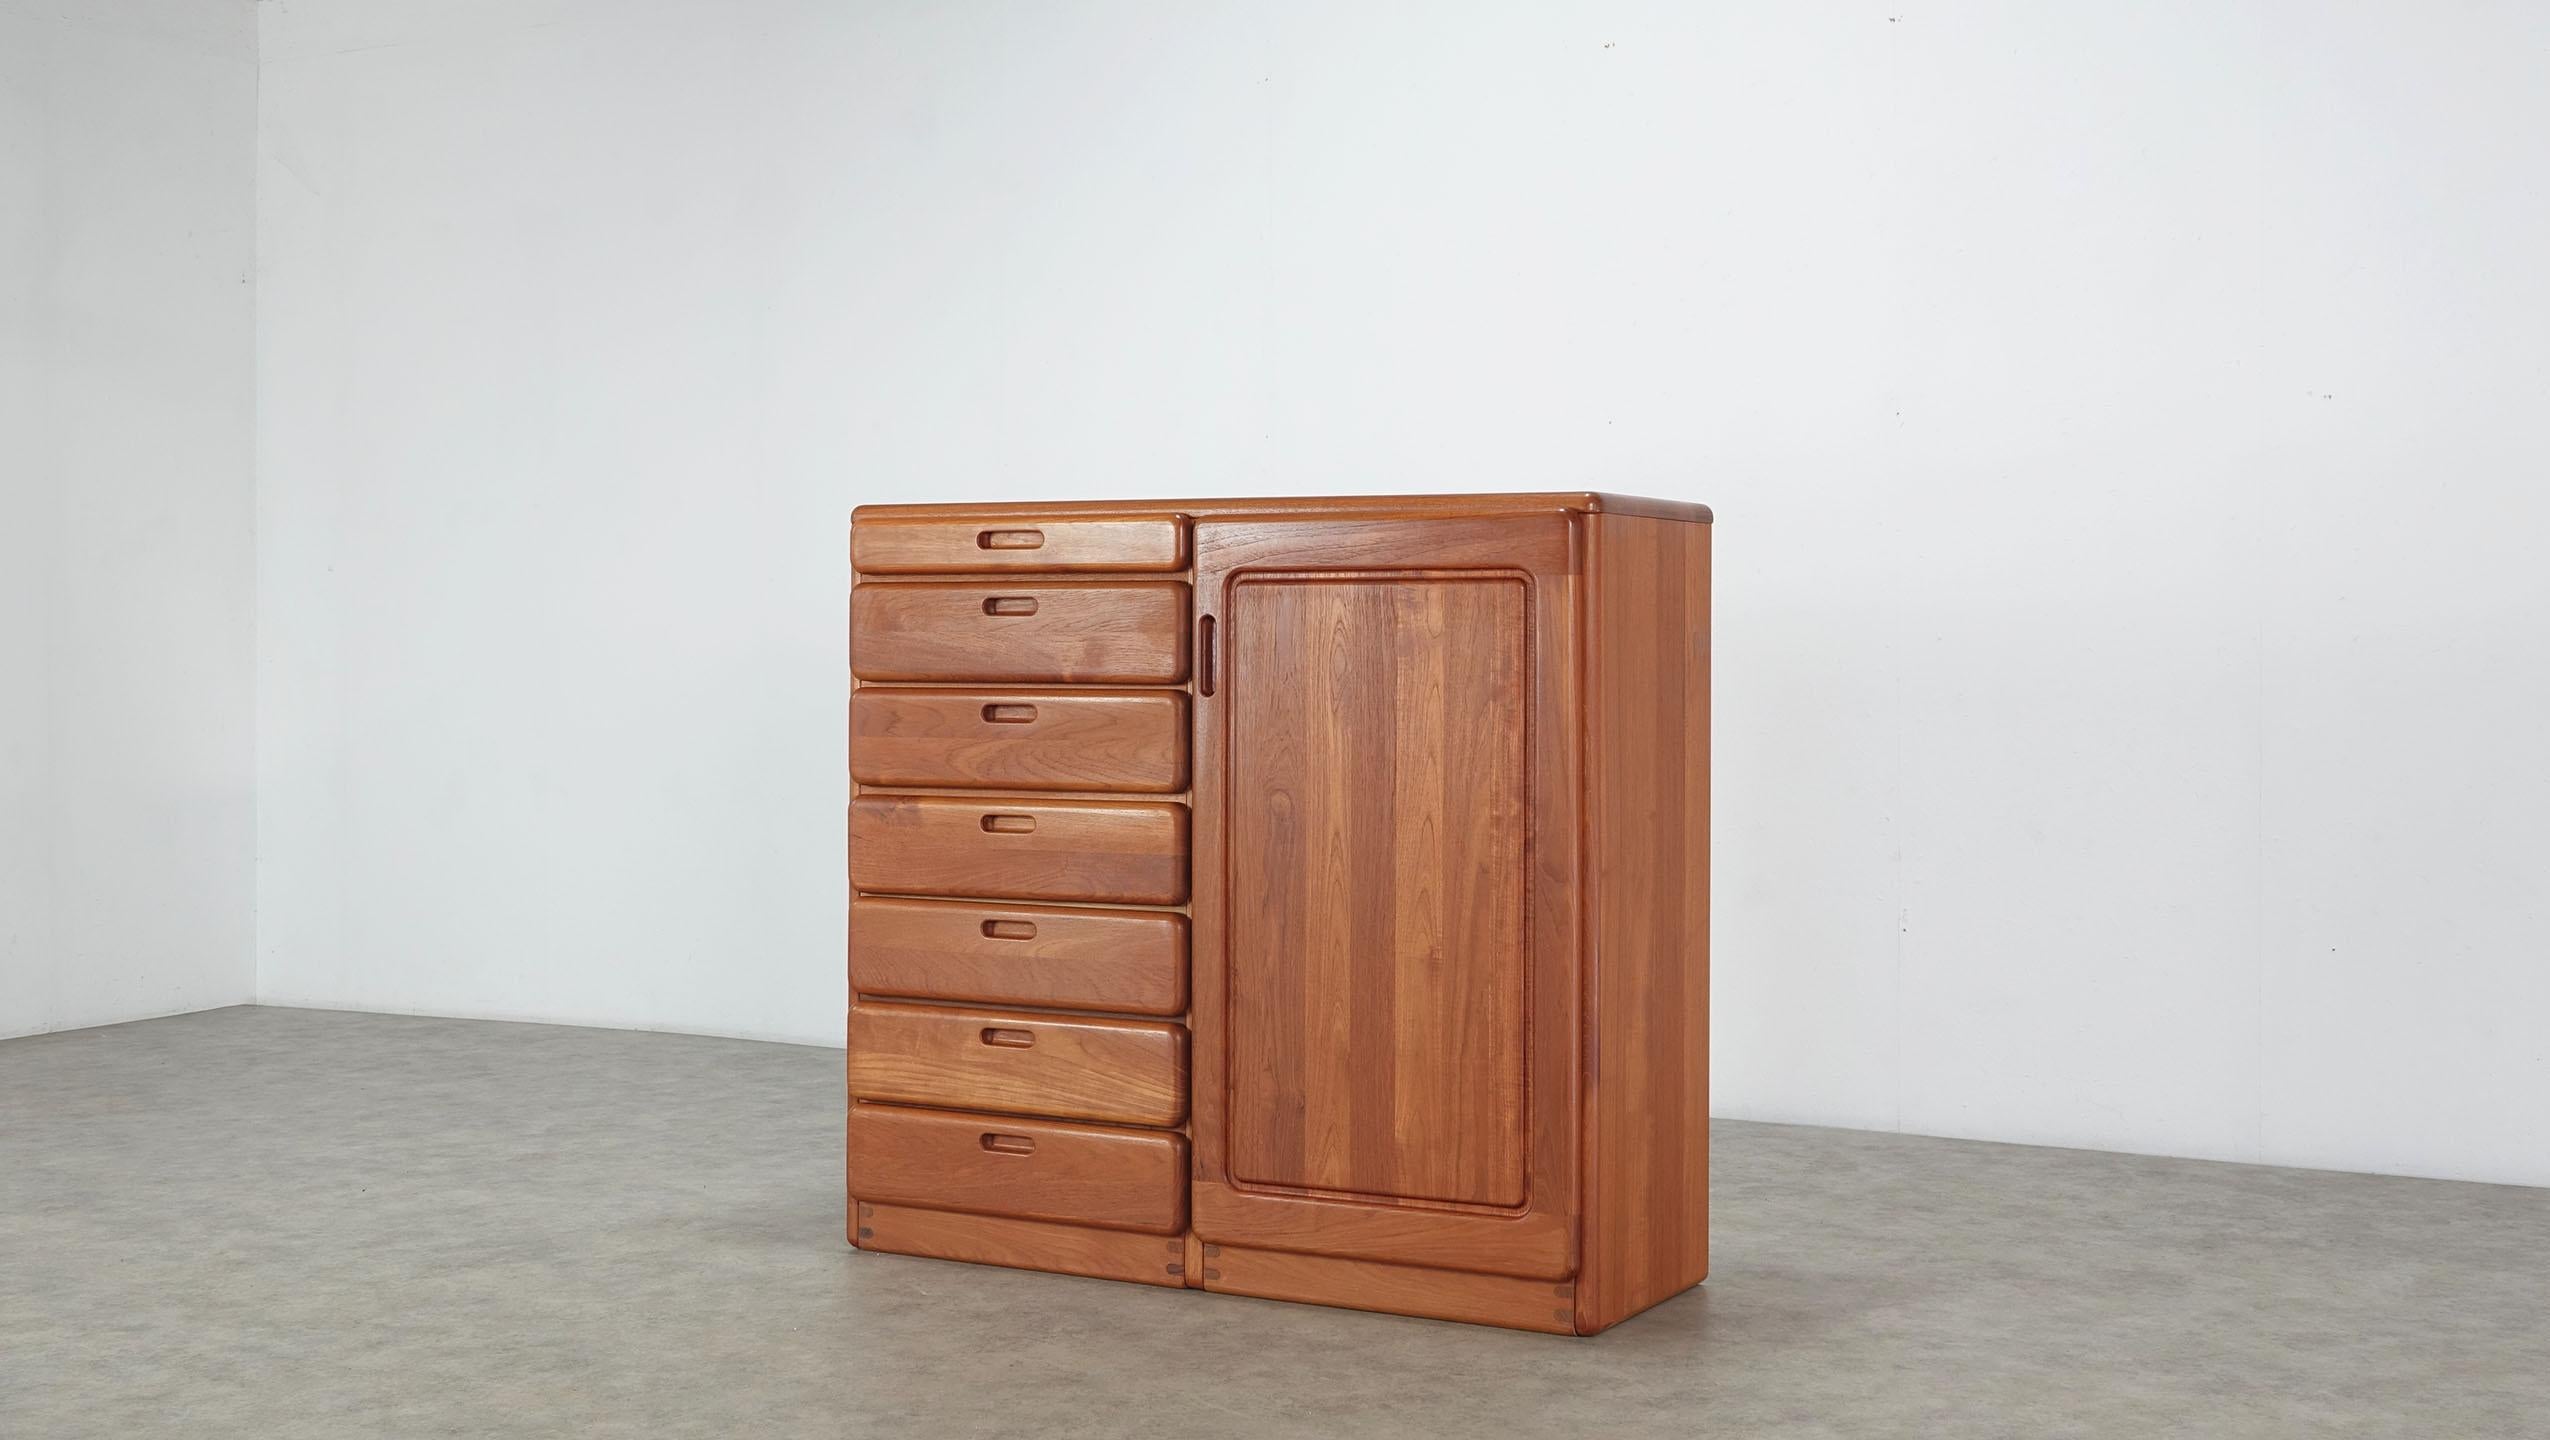 Teak Chest with Drawers and Compartments Langeskov Møbelfabrik A / S Denmark For Sale 3